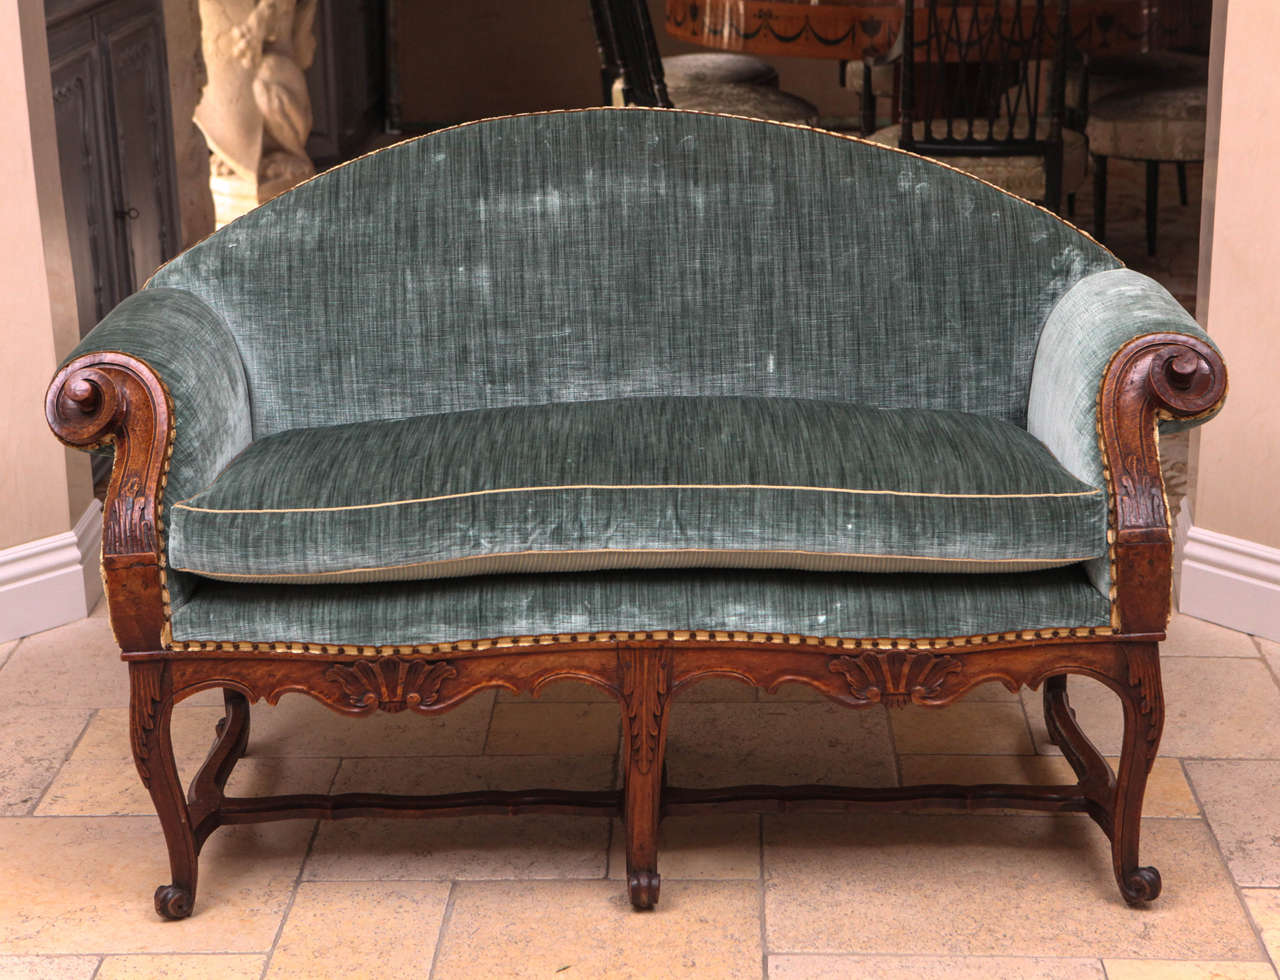 18th century French Regence walnut settee finely carved with scrolled arms. The settee is covered in silk velvet fabric.